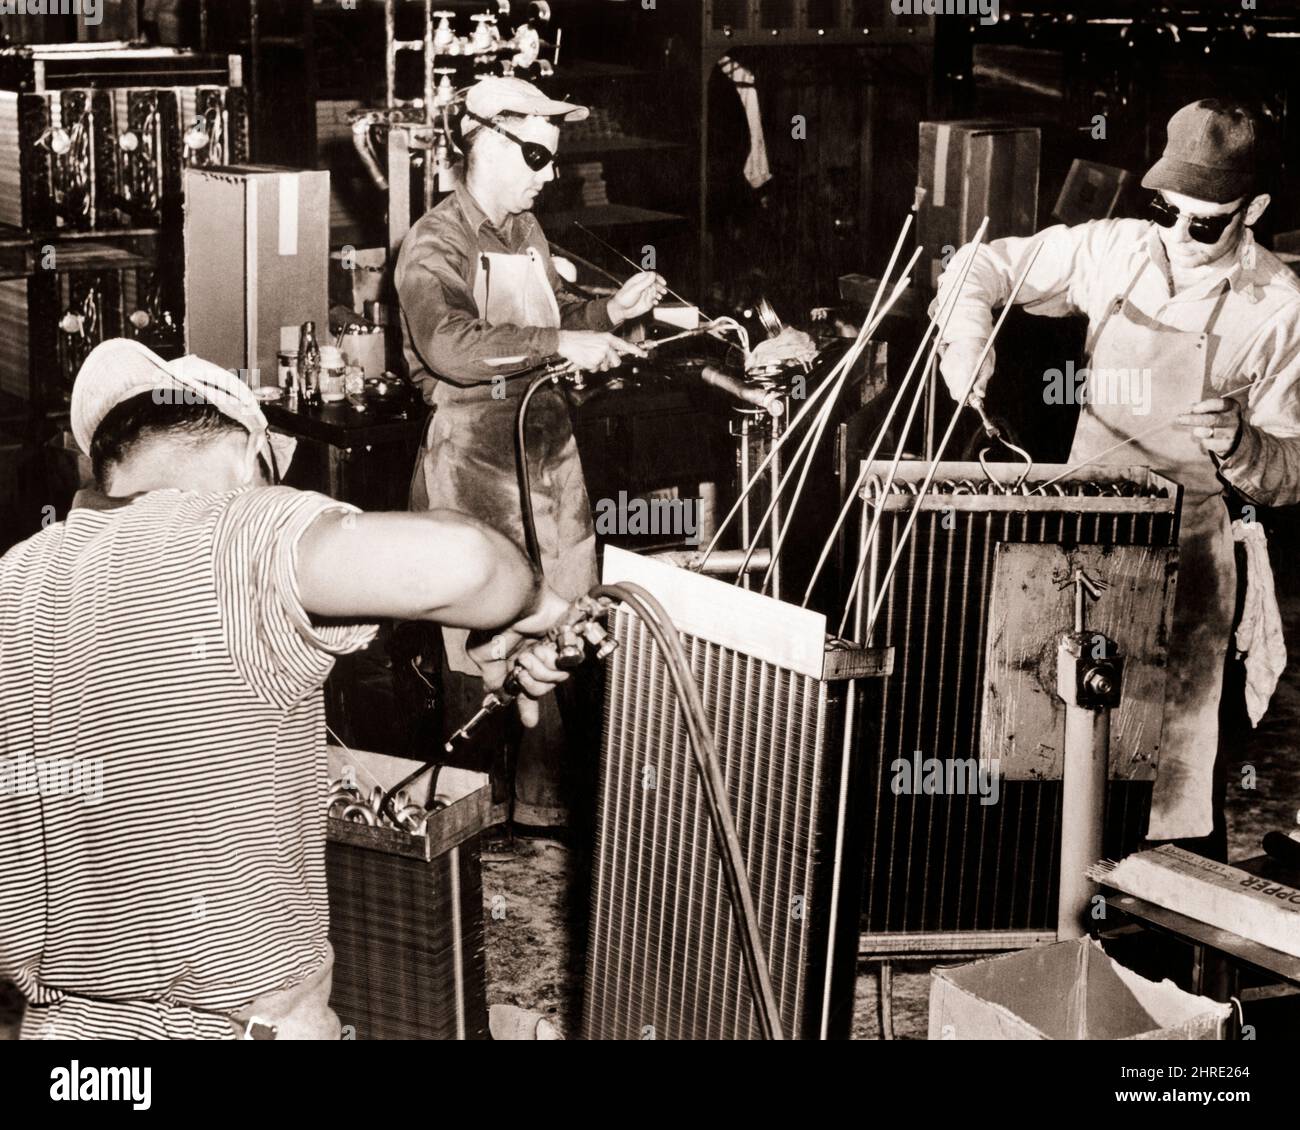 1960s THREE MEN WORKING WELDING AIR CONDITIONERS WESTINGHOUSE PLANT STAUNTON VIRGINIA USA - i776 LAN001 HARS PROTECTION INNOVATION LABOR OPPORTUNITY EMPLOYMENT MANUFACTURING OCCUPATIONS WELDING AIR CONDITIONERS EMPLOYEE MID-ADULT MID-ADULT MAN PRECISION YOUNG ADULT MAN BLACK AND WHITE CAUCASIAN ETHNICITY LABORING OLD FASHIONED Stock Photo